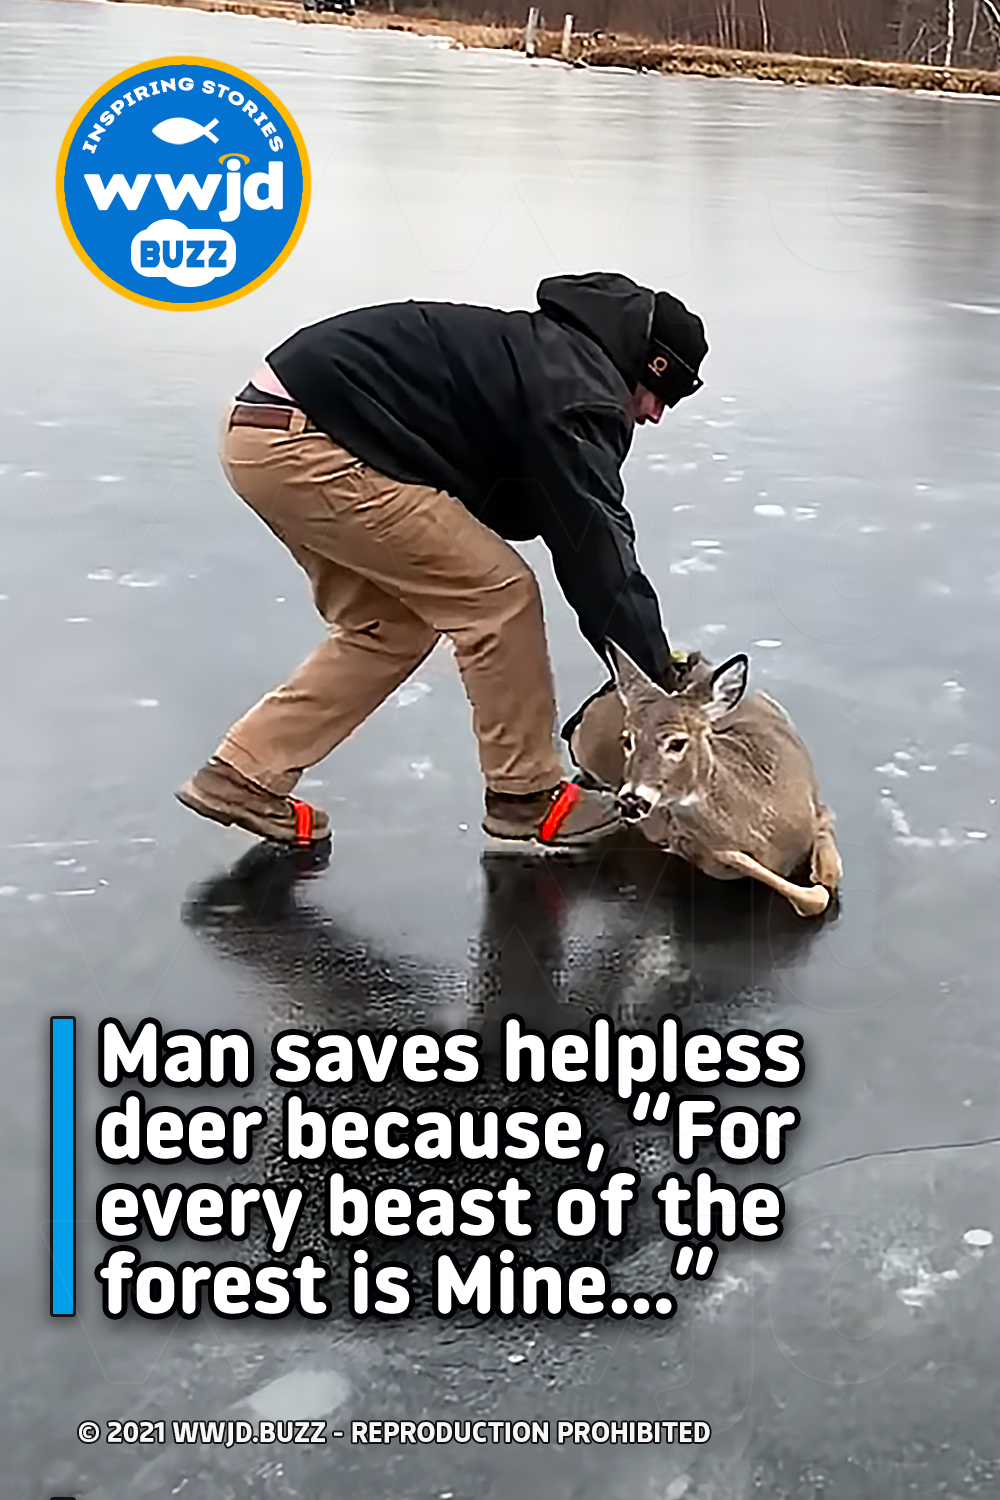 Man saves helpless deer because, “For every beast of the forest is Mine…”